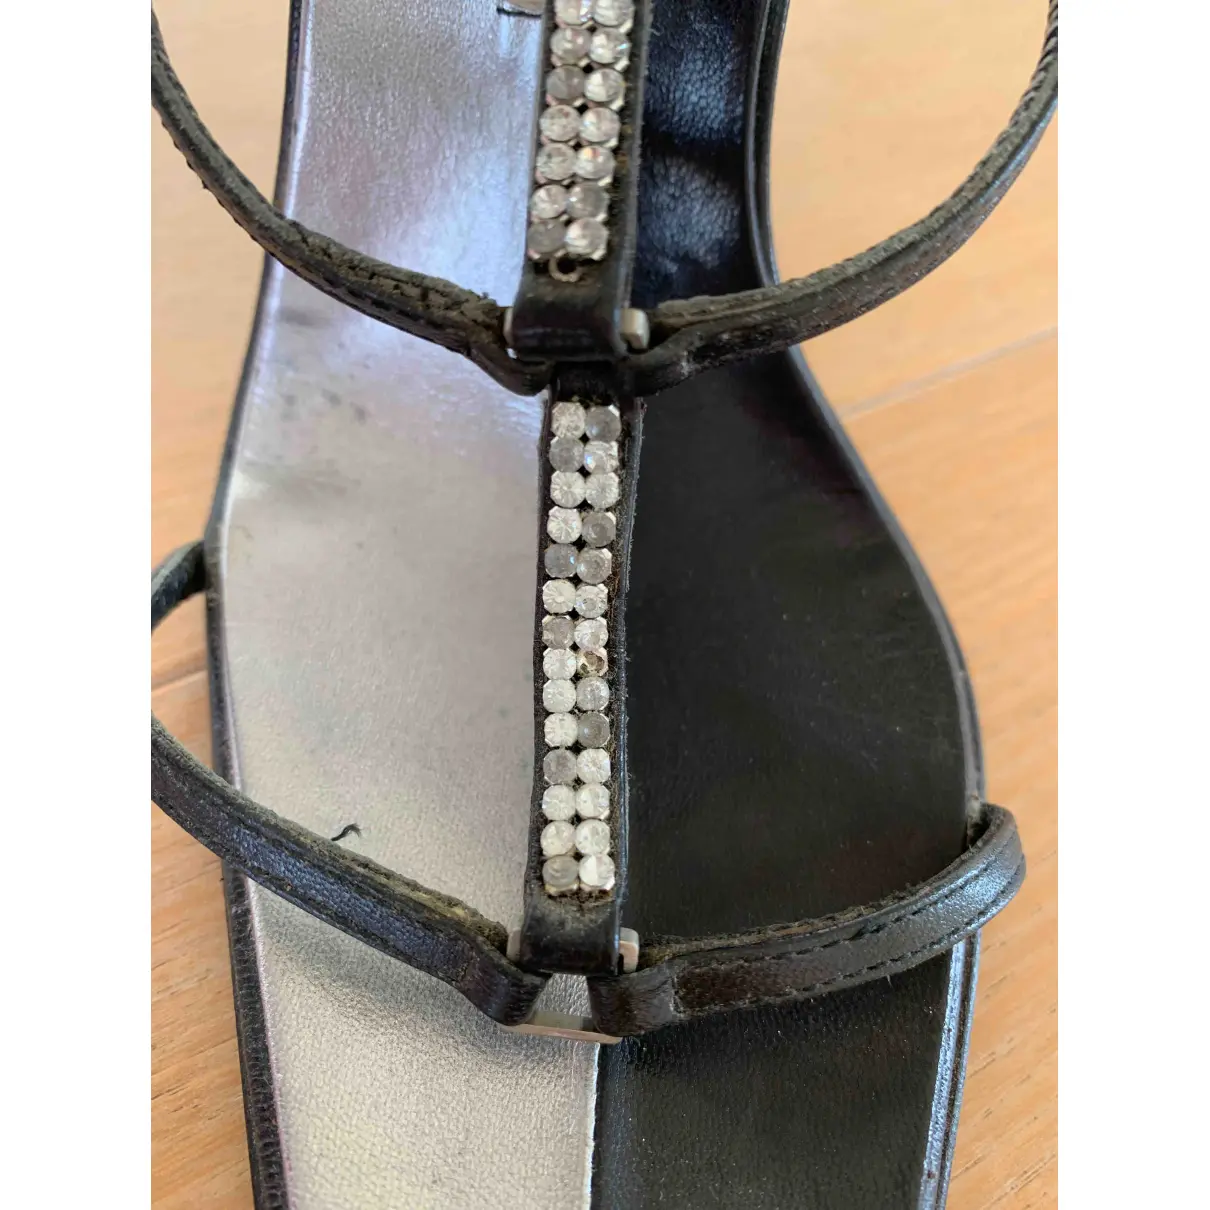 Buy Diego Dolcini Leather sandals online